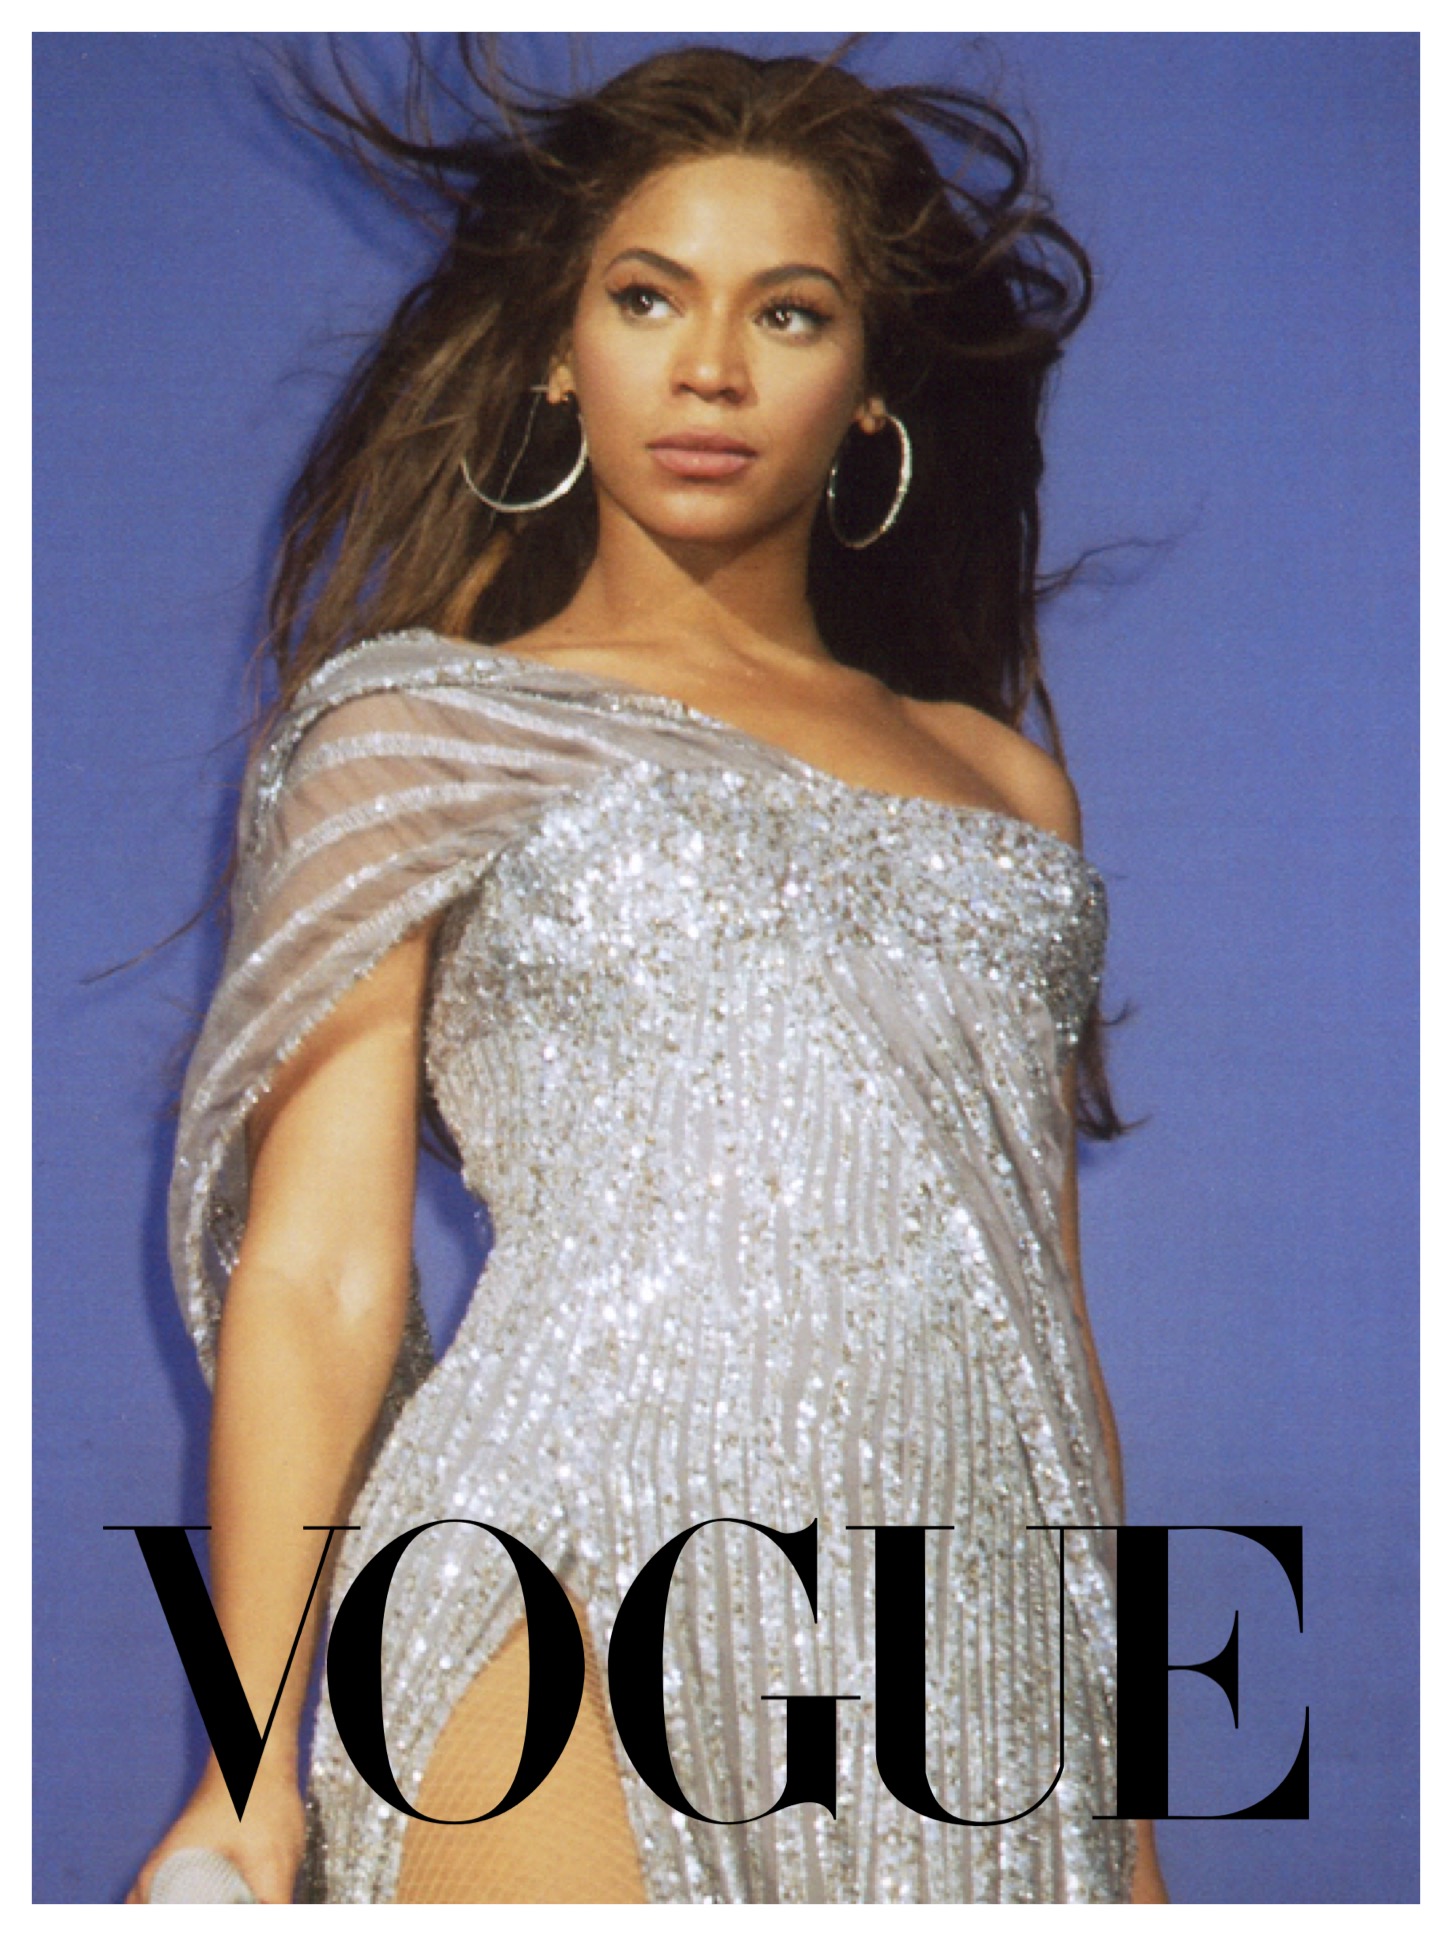 American Vogue reveals September cover starring Beyoncé and it's a first